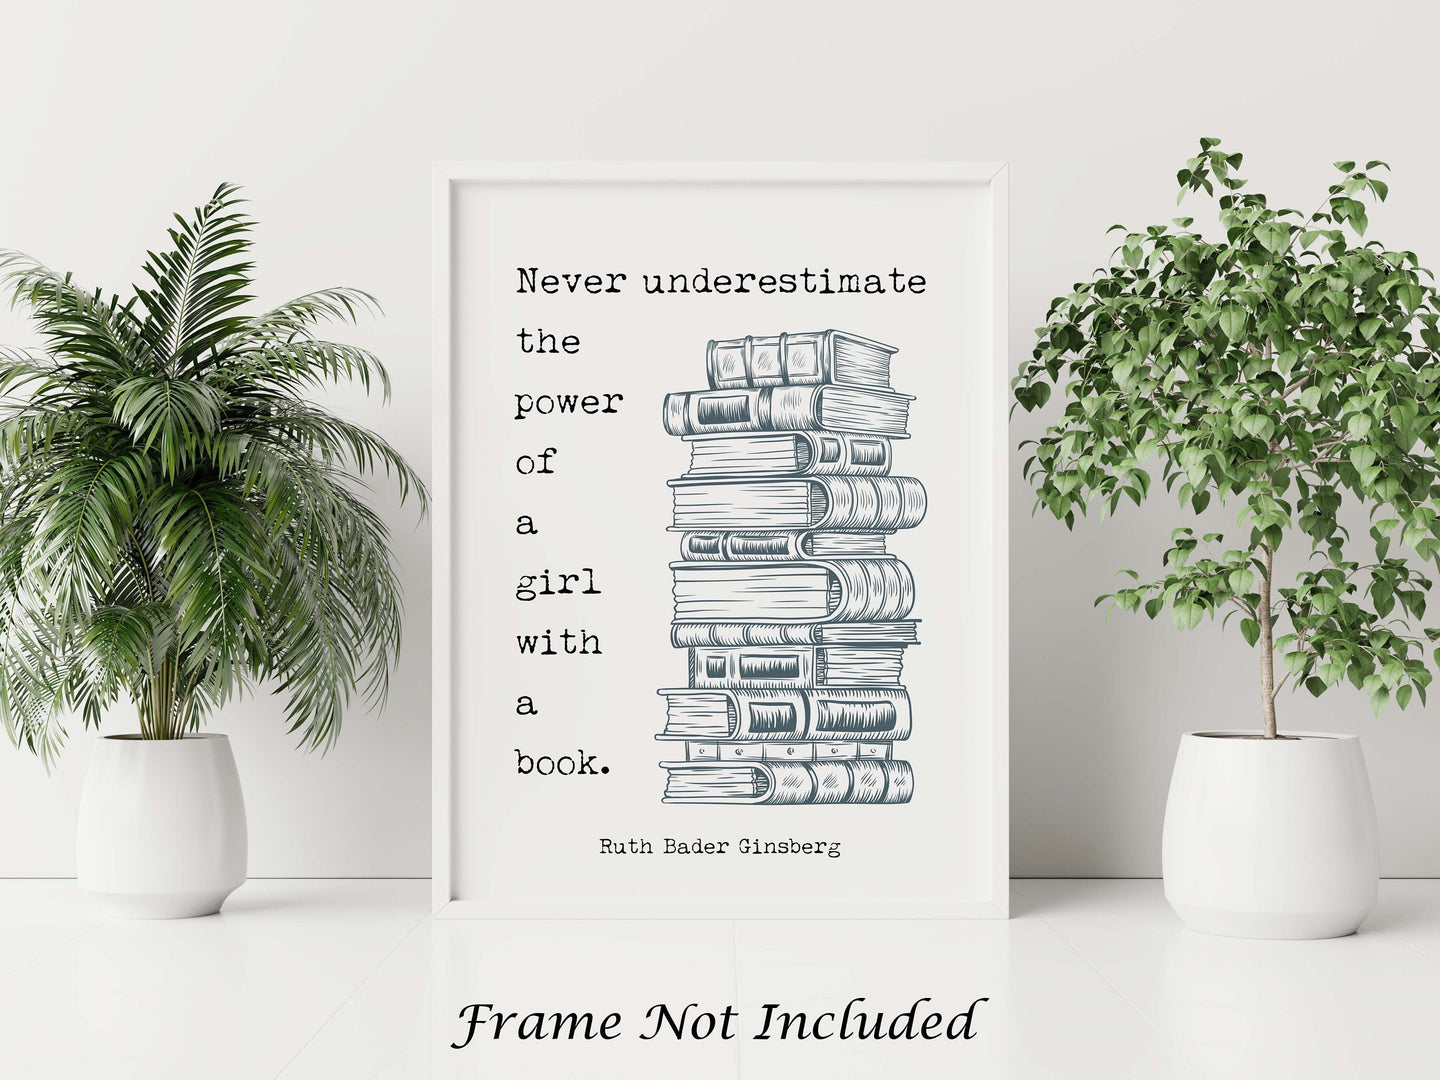 Ruth Bader Ginsburg Wall Art - Never underestimate the power of a girl with a book - RBG Print - Physical Art Print Without Frame